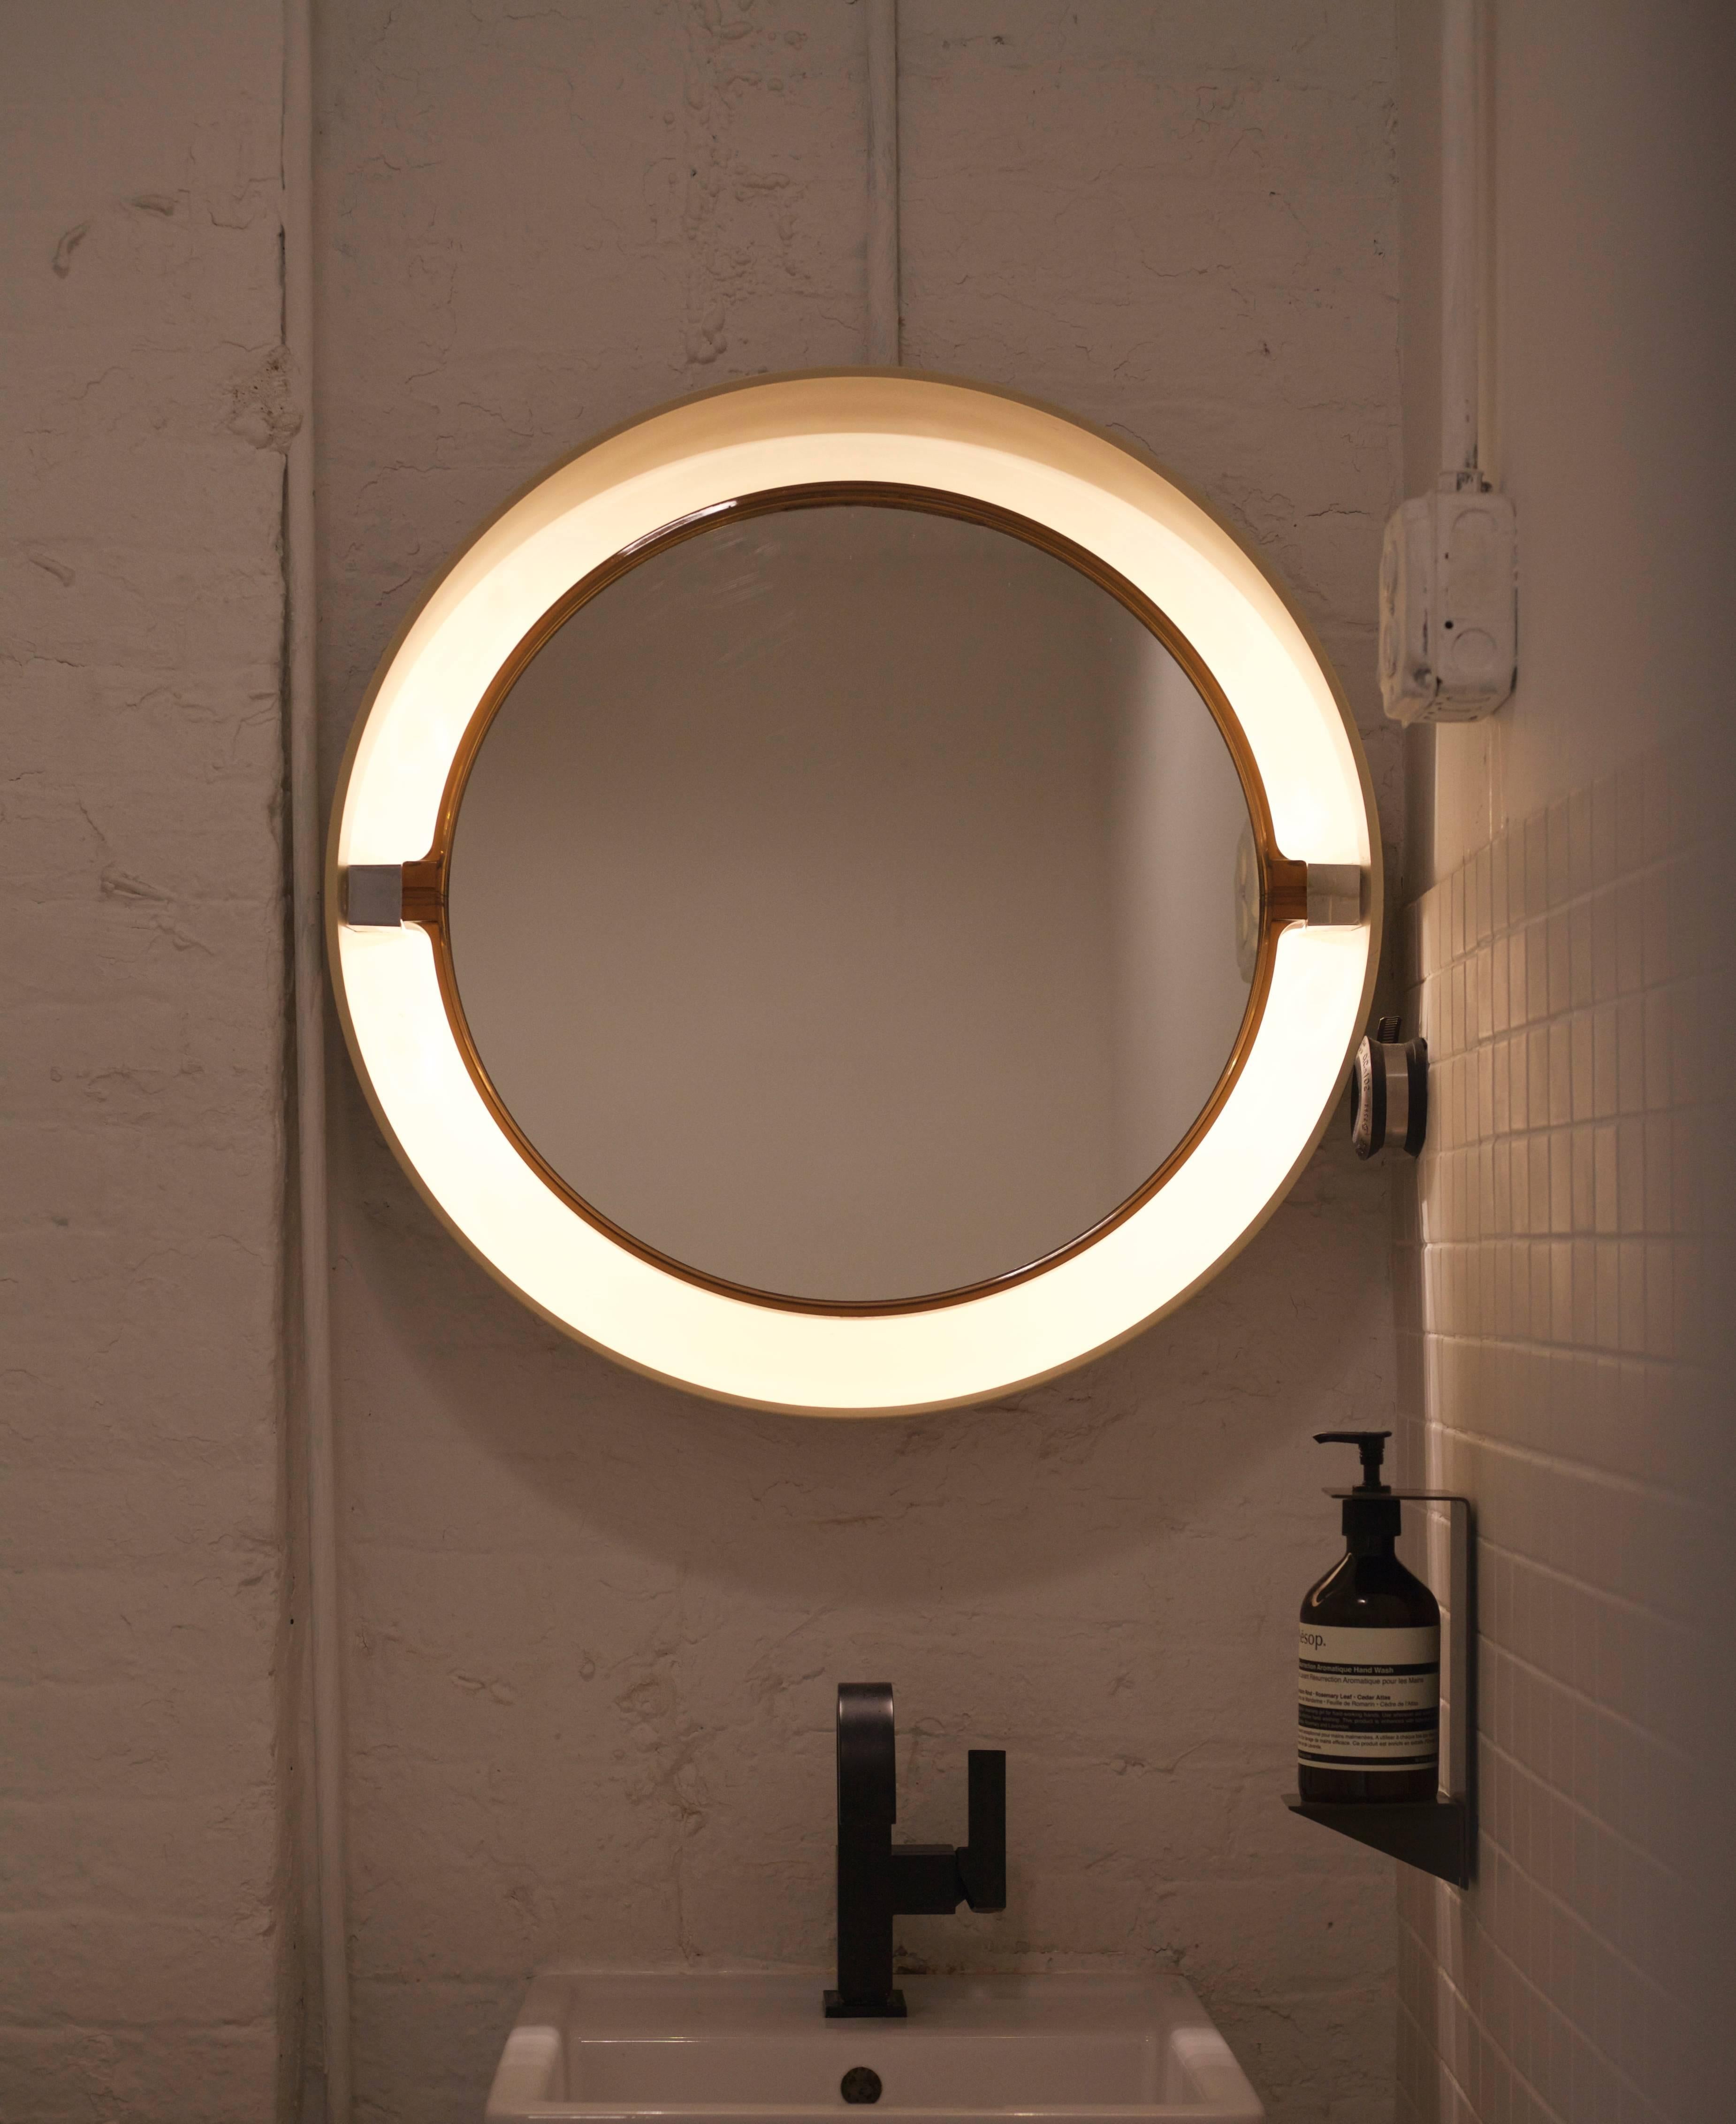 Unique light-up mirror with mirror on a two way swivel. Has euro plug.